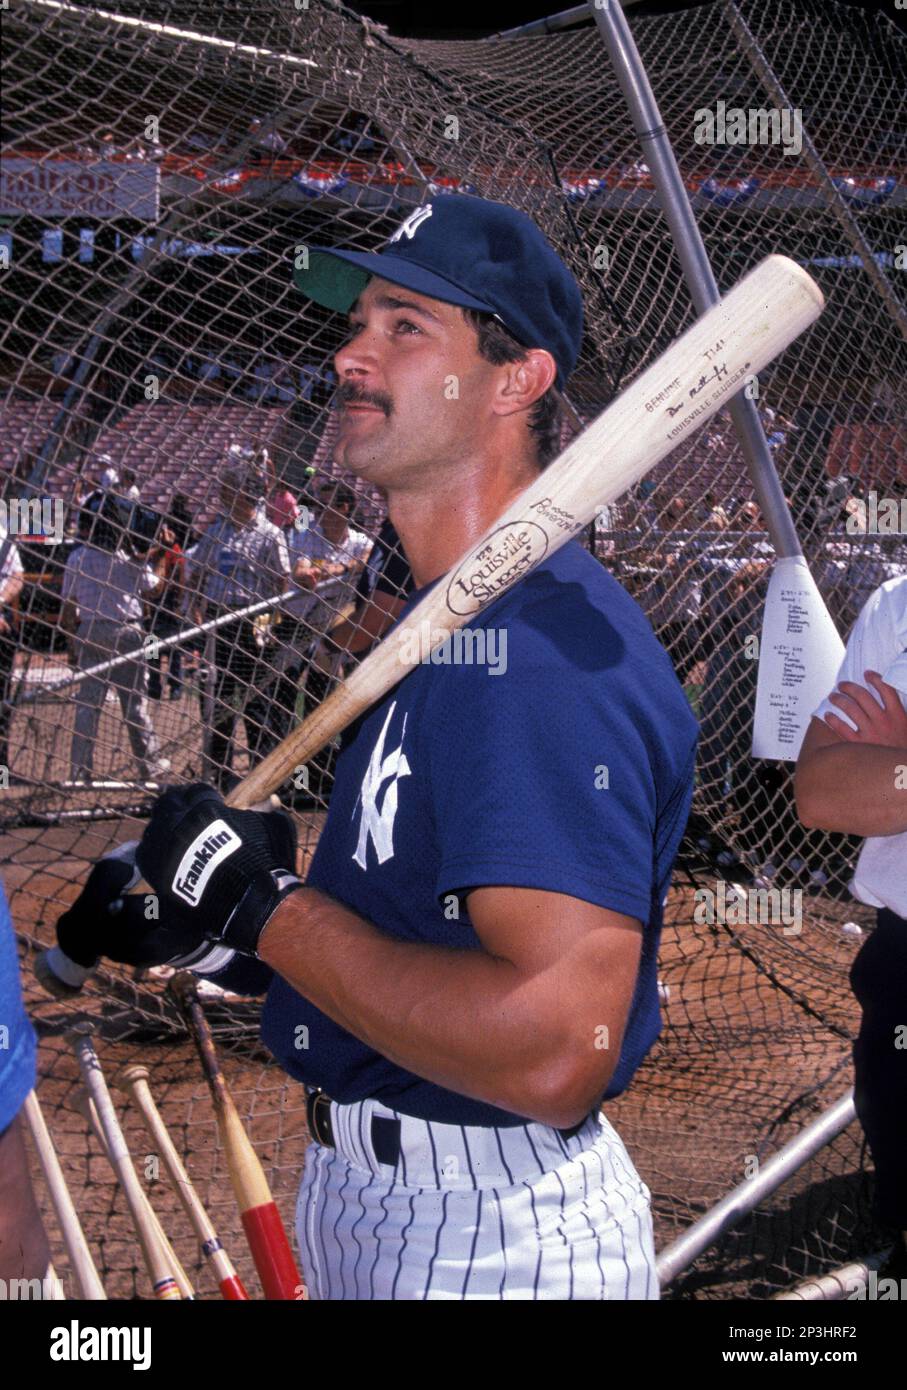 New York Yankees Don Mattingly (23) during a game from the 1989 season. Don  Mattingly played for 14 years all with the Yankees, was a 6-time All-Star  and won the American League